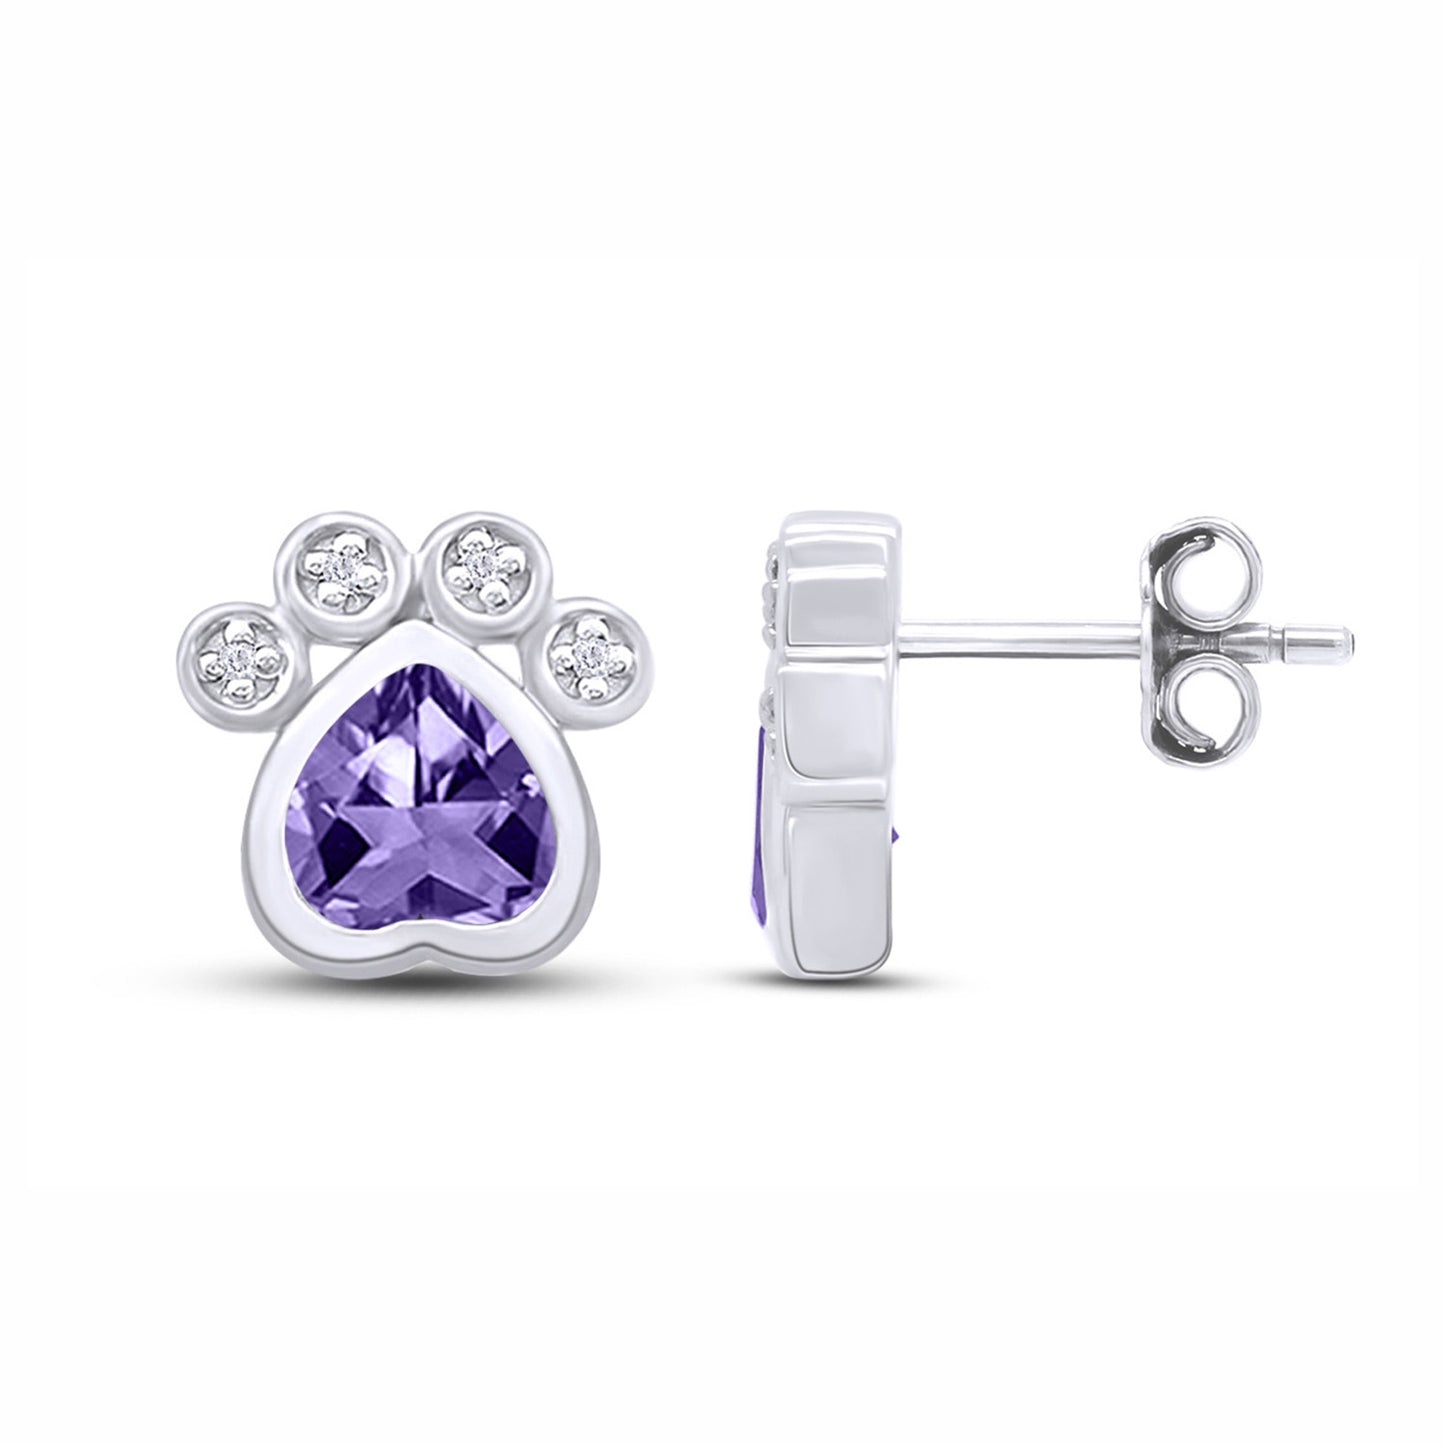 Heart & Round Cut Simulated Birthstone & White Cubic Zirconia Dog Paw Print Stud Earrings For Women In 925 Sterling Silver